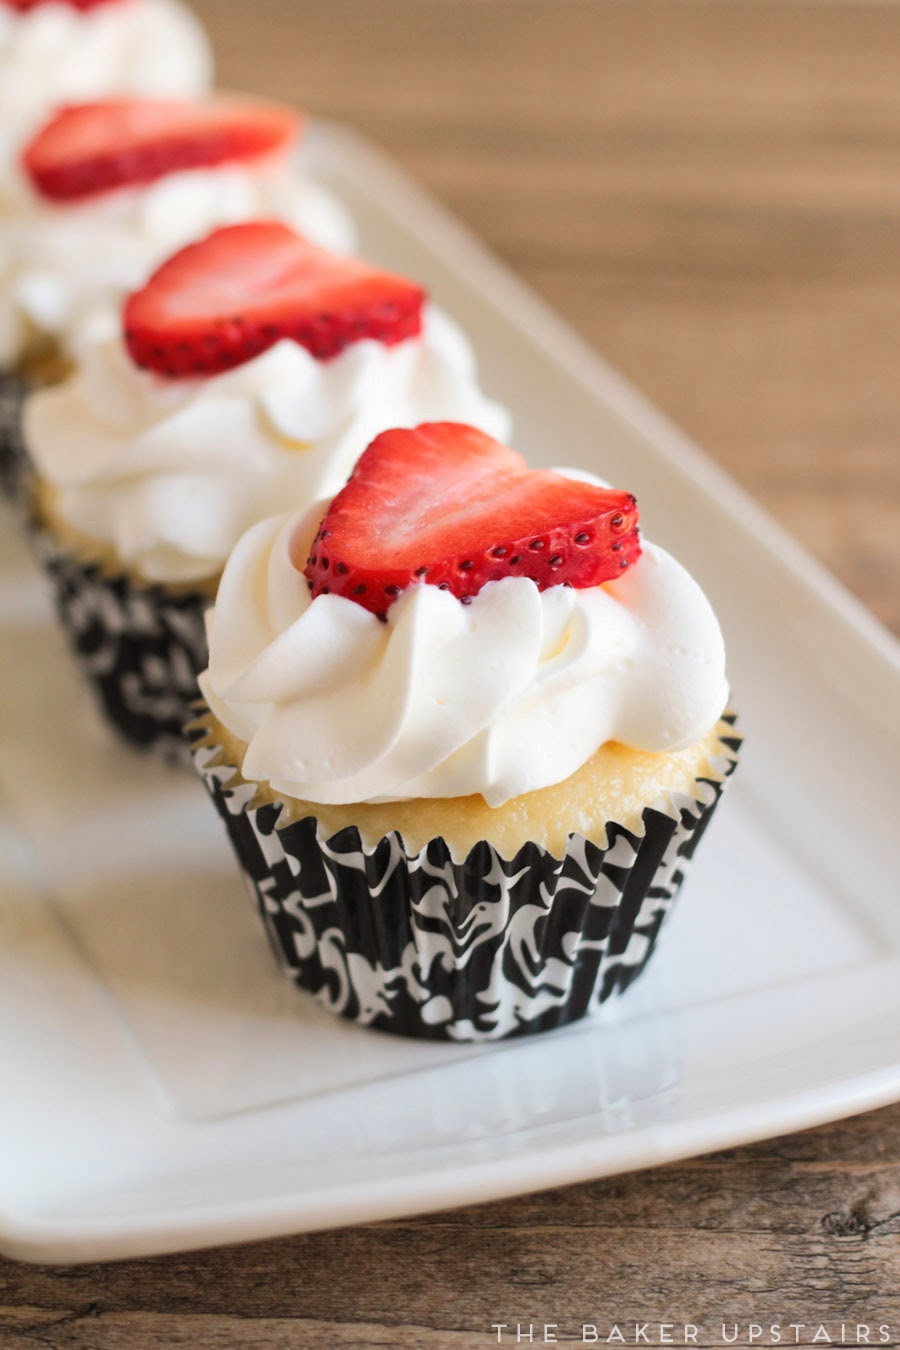 These tres leches cupcakes are so moist and flavorful, topped with lightly sweetened whipped cream and fresh strawberries. So, so good!